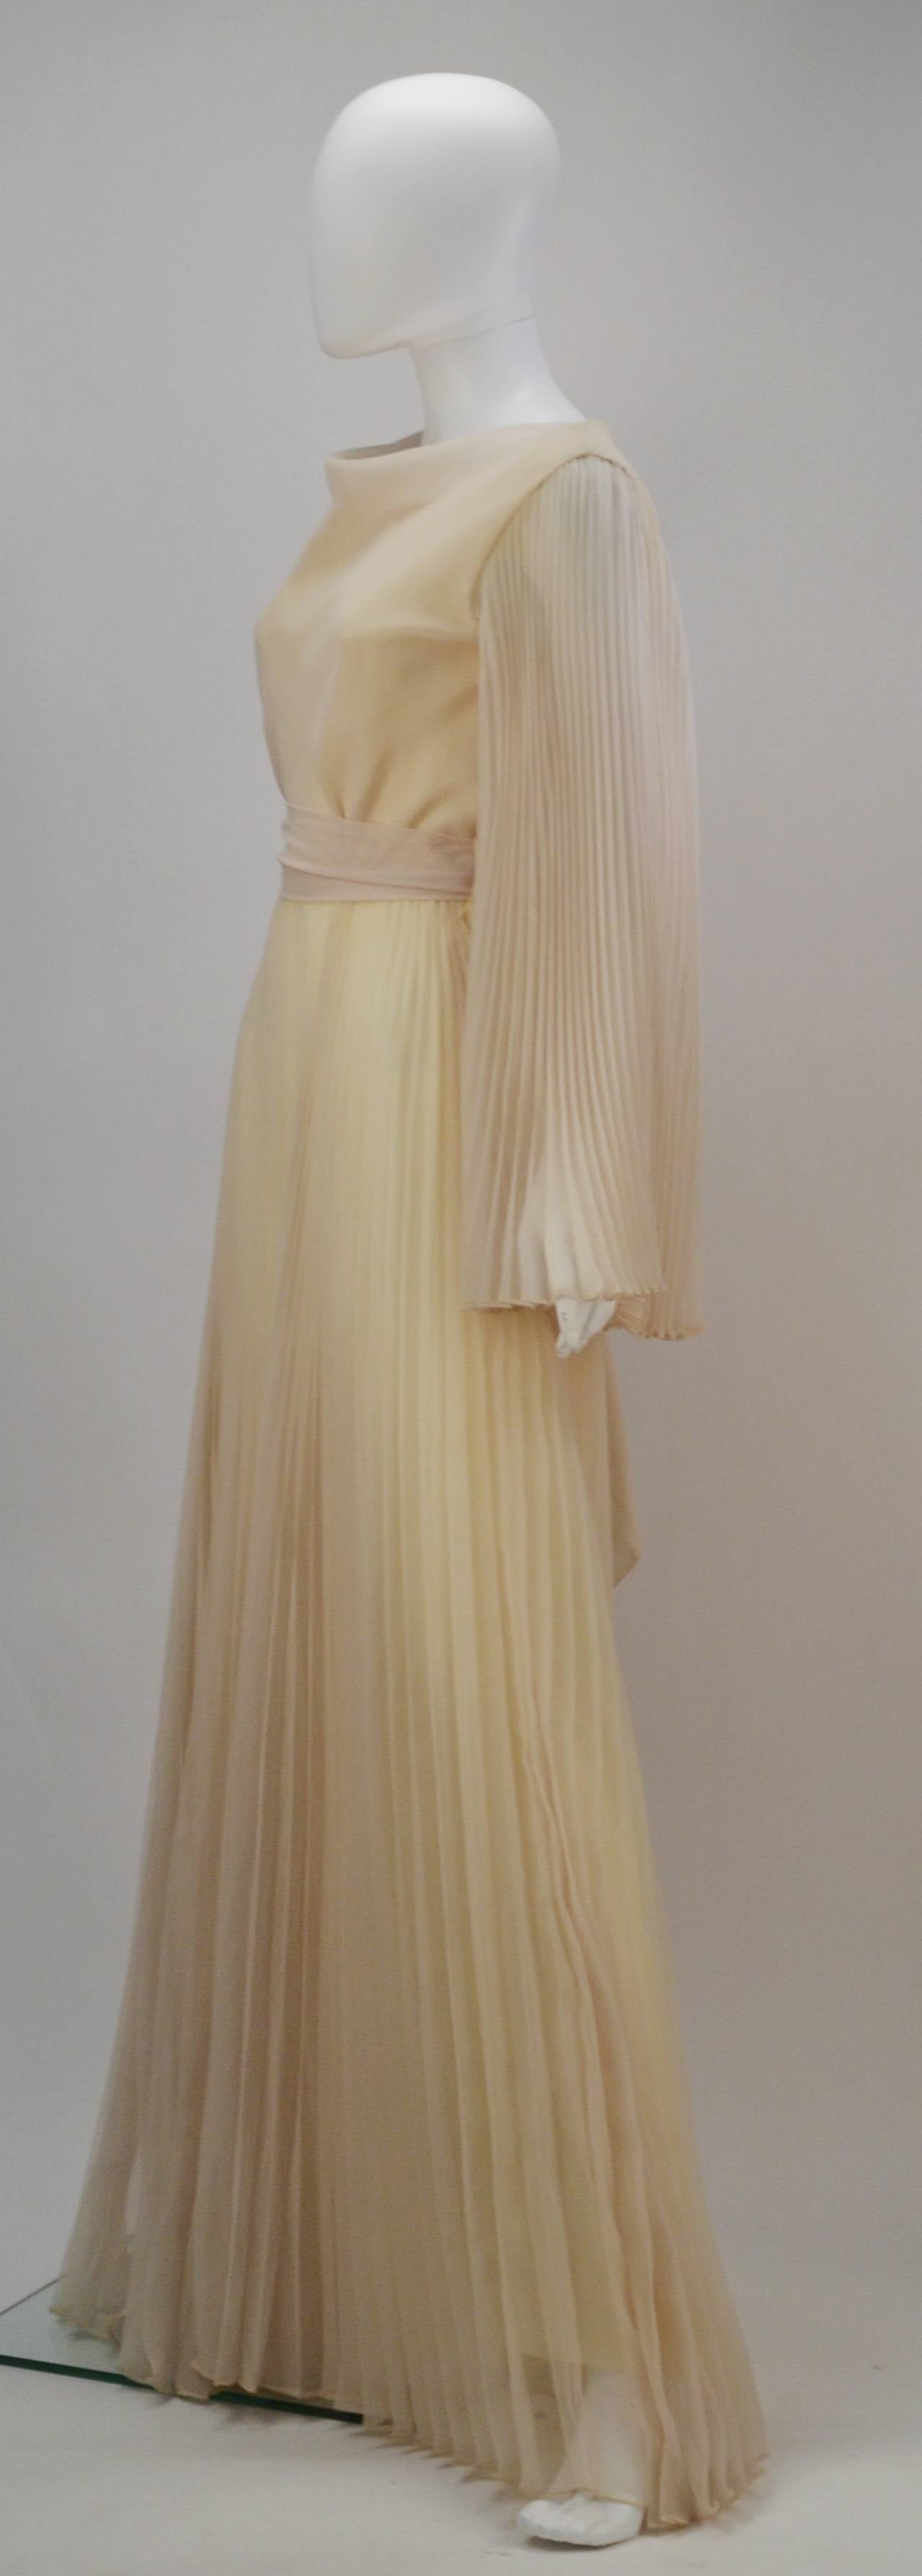 Let loose and dance around in this ethereal Mollie Parnis Boutique pleated dress. It features a subtle cowl or draped neckline and flowy pleated sleeves and skirt. It also includes a sash which ties delicately at the waist. Zipper center